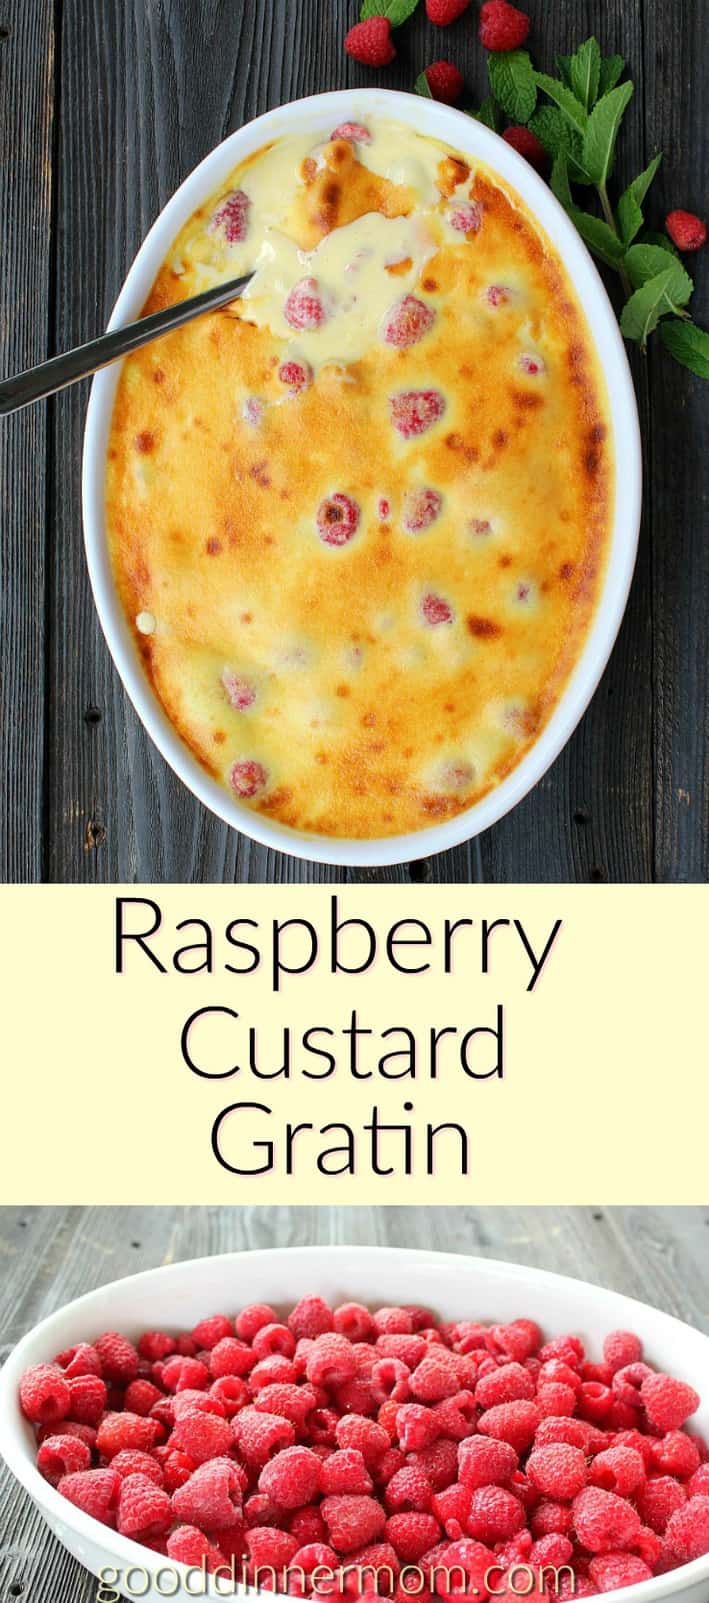 Raspberry Custard Gratin is simple to make, with homemade Bavarian custard mixed with whipped cream, spread over the raspberries and toasted to perfection.